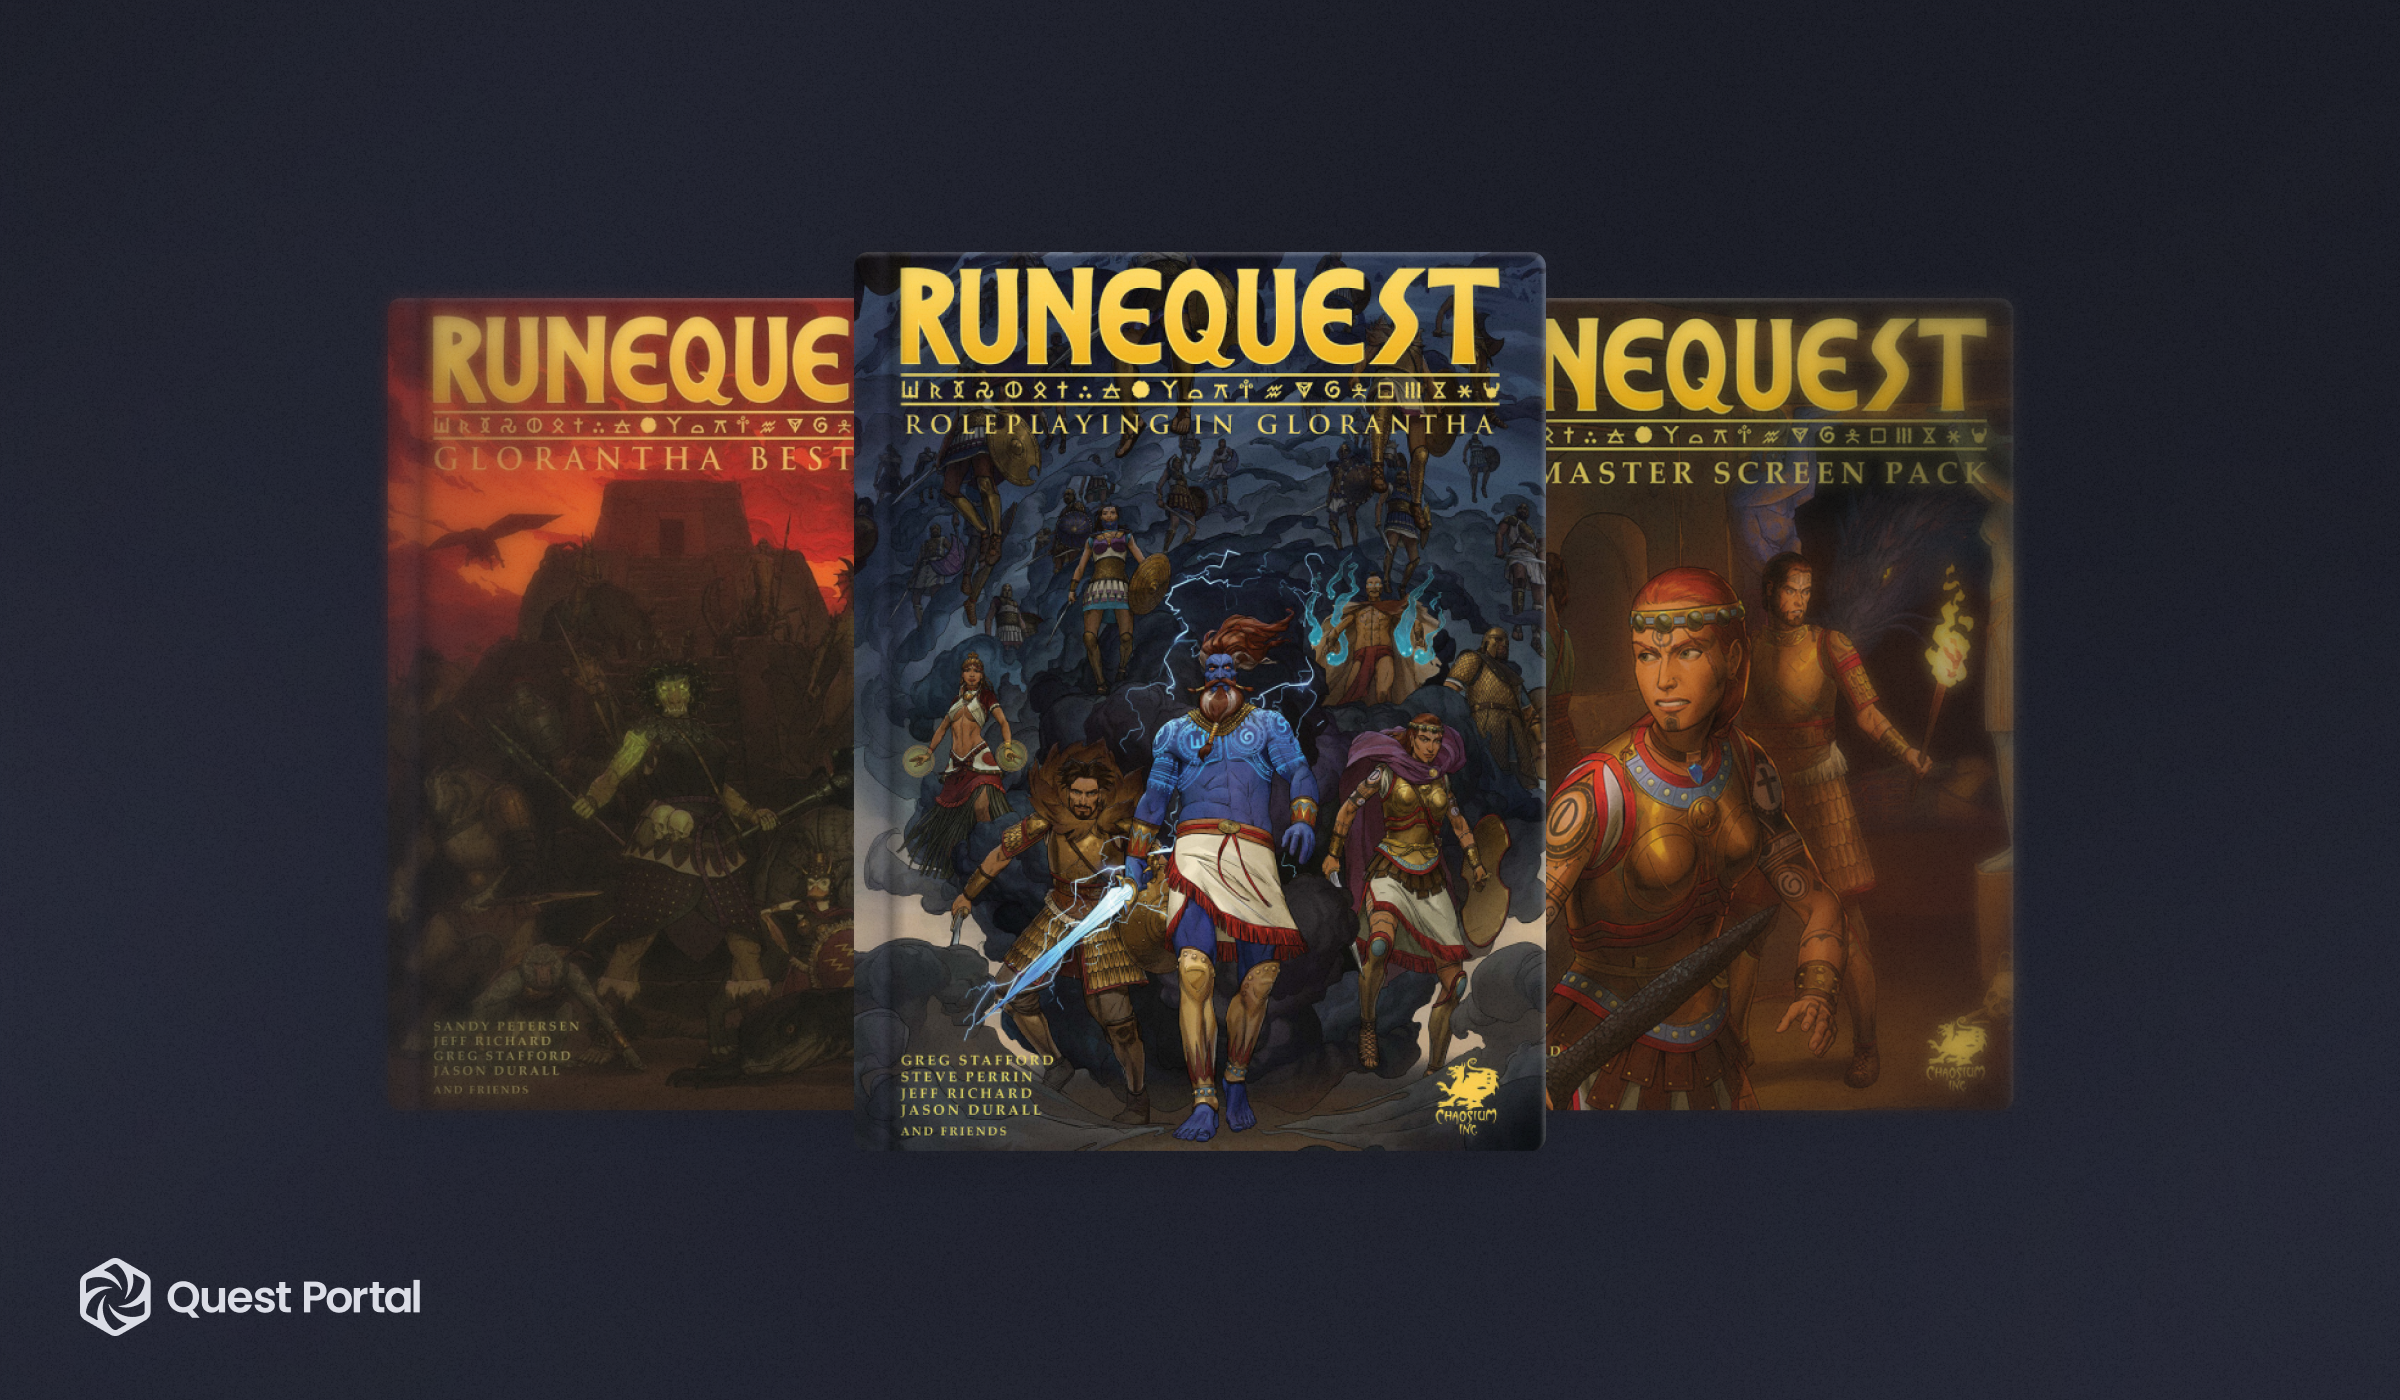 Image of the new RuneQuest books in Chaosium Core